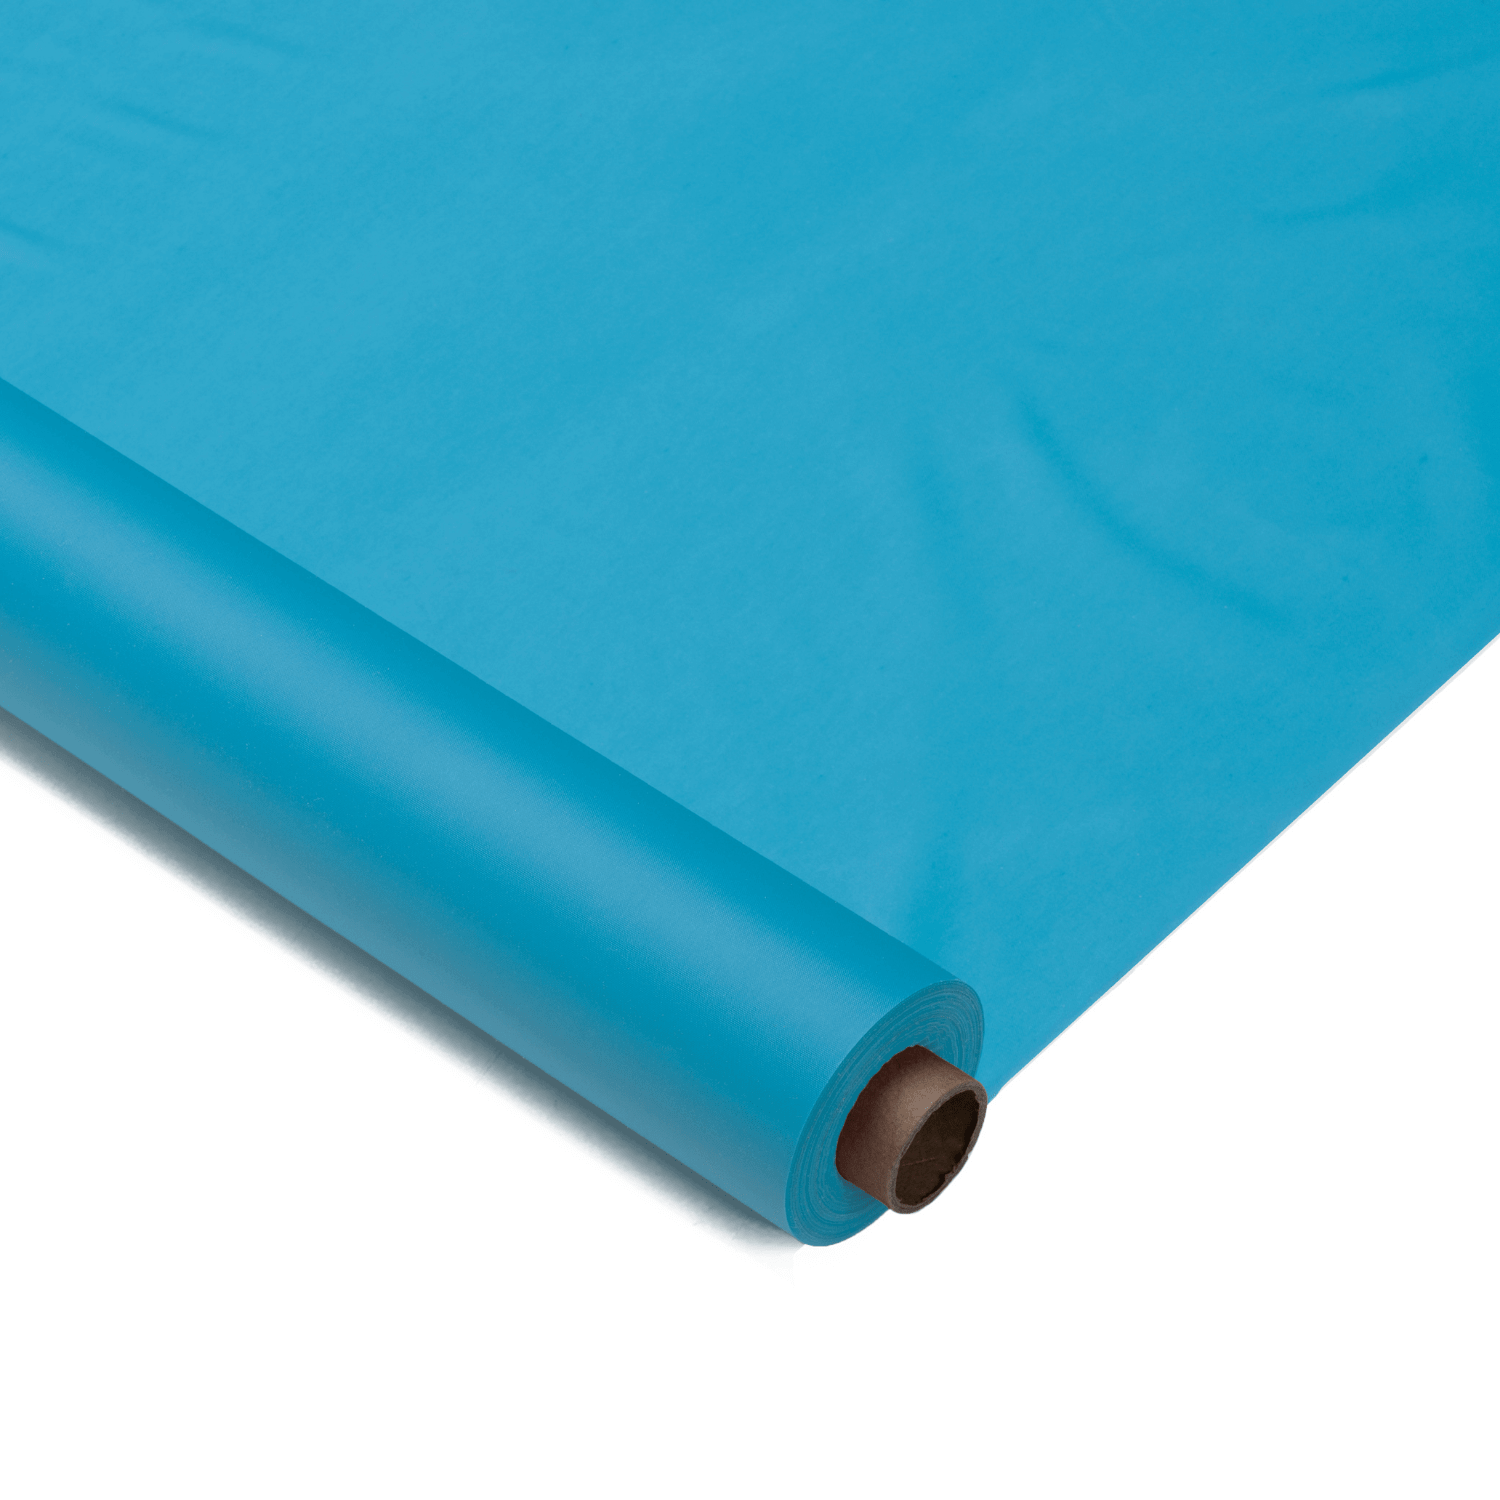 40 In. X 300 Ft. Premium Turquoise Plastic Table Roll | 4 Pack - Yom Tov Settings